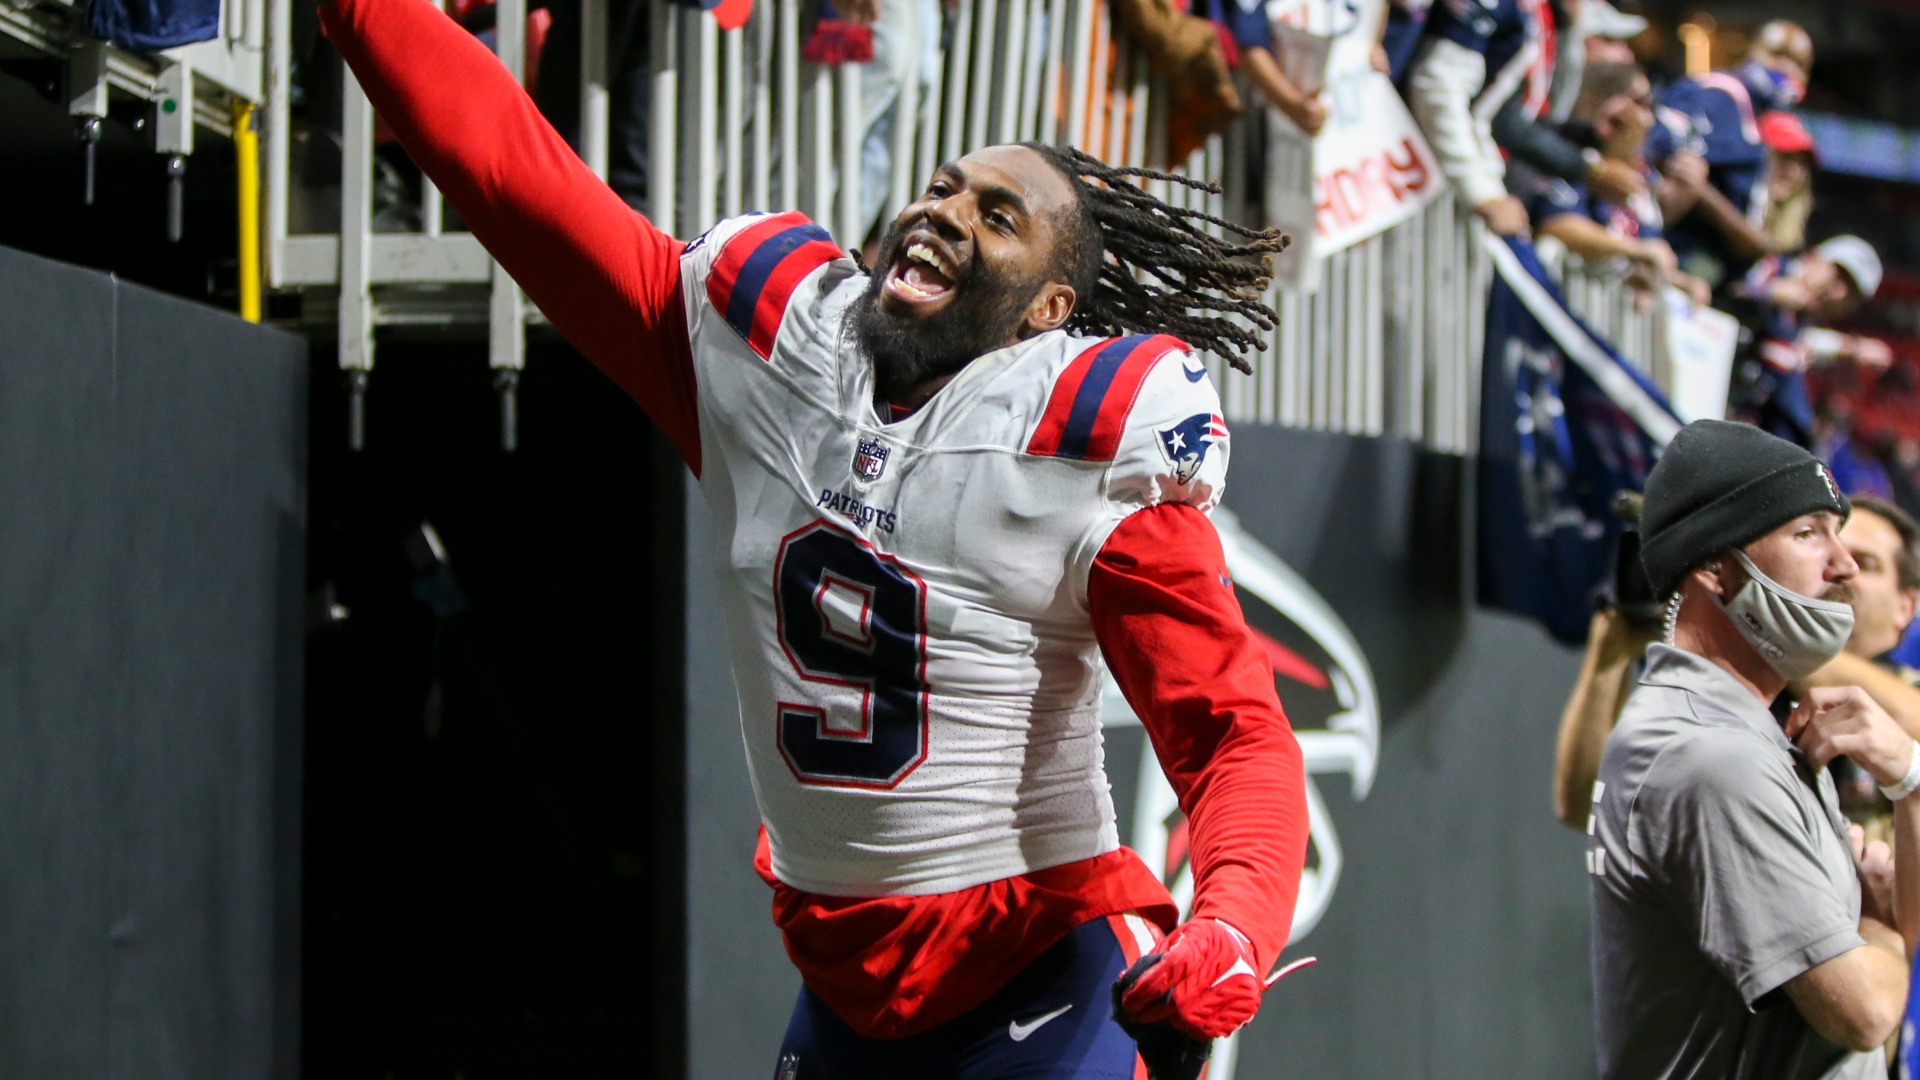 Patriots’ Matthew Judon Has On-Brand Reaction To Extension
‘Report’